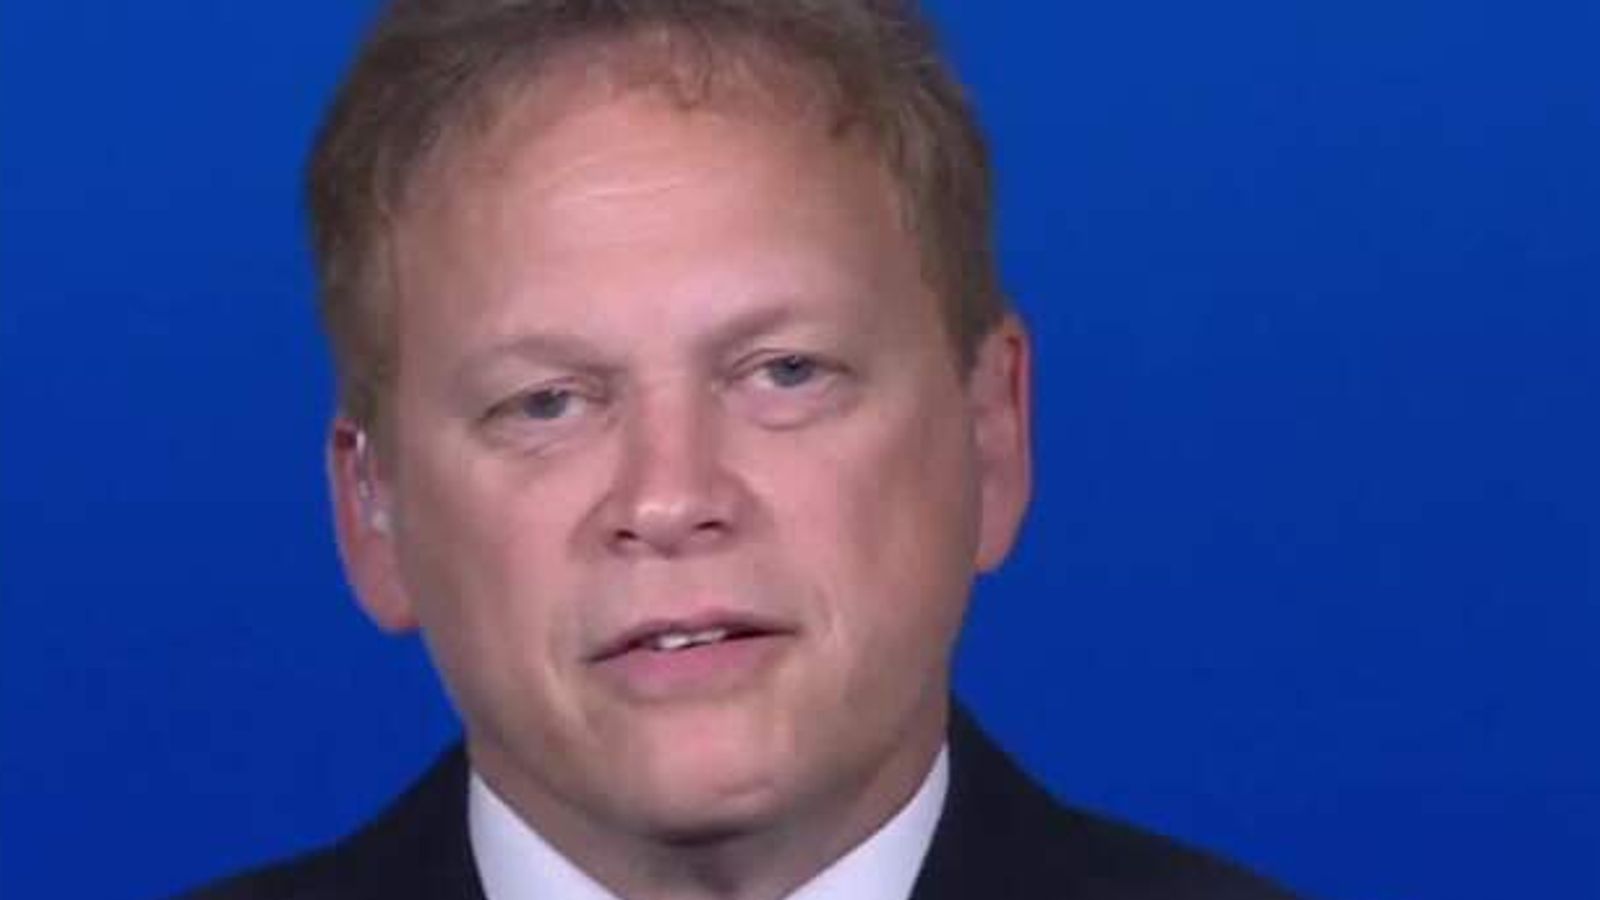 'Disappointing' for Israel to reject two-state solution, says Shapps